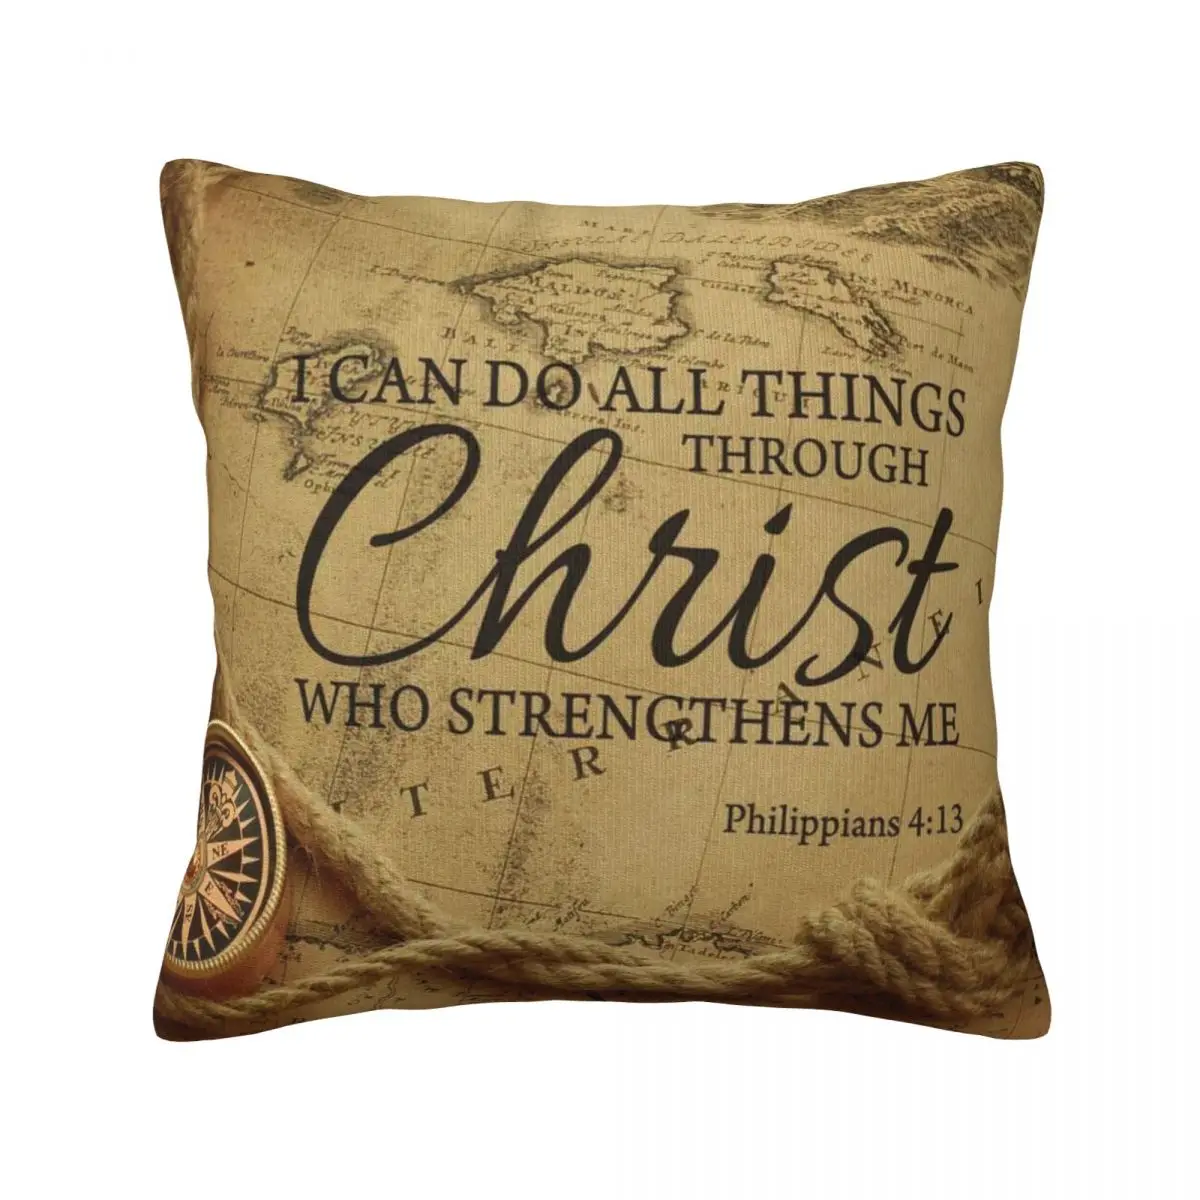 

I Can Do All Things Throw Pillow Cover Decorative Pillow Covers Home Pillows Shells Cushion Cover Zippered Pillowcase